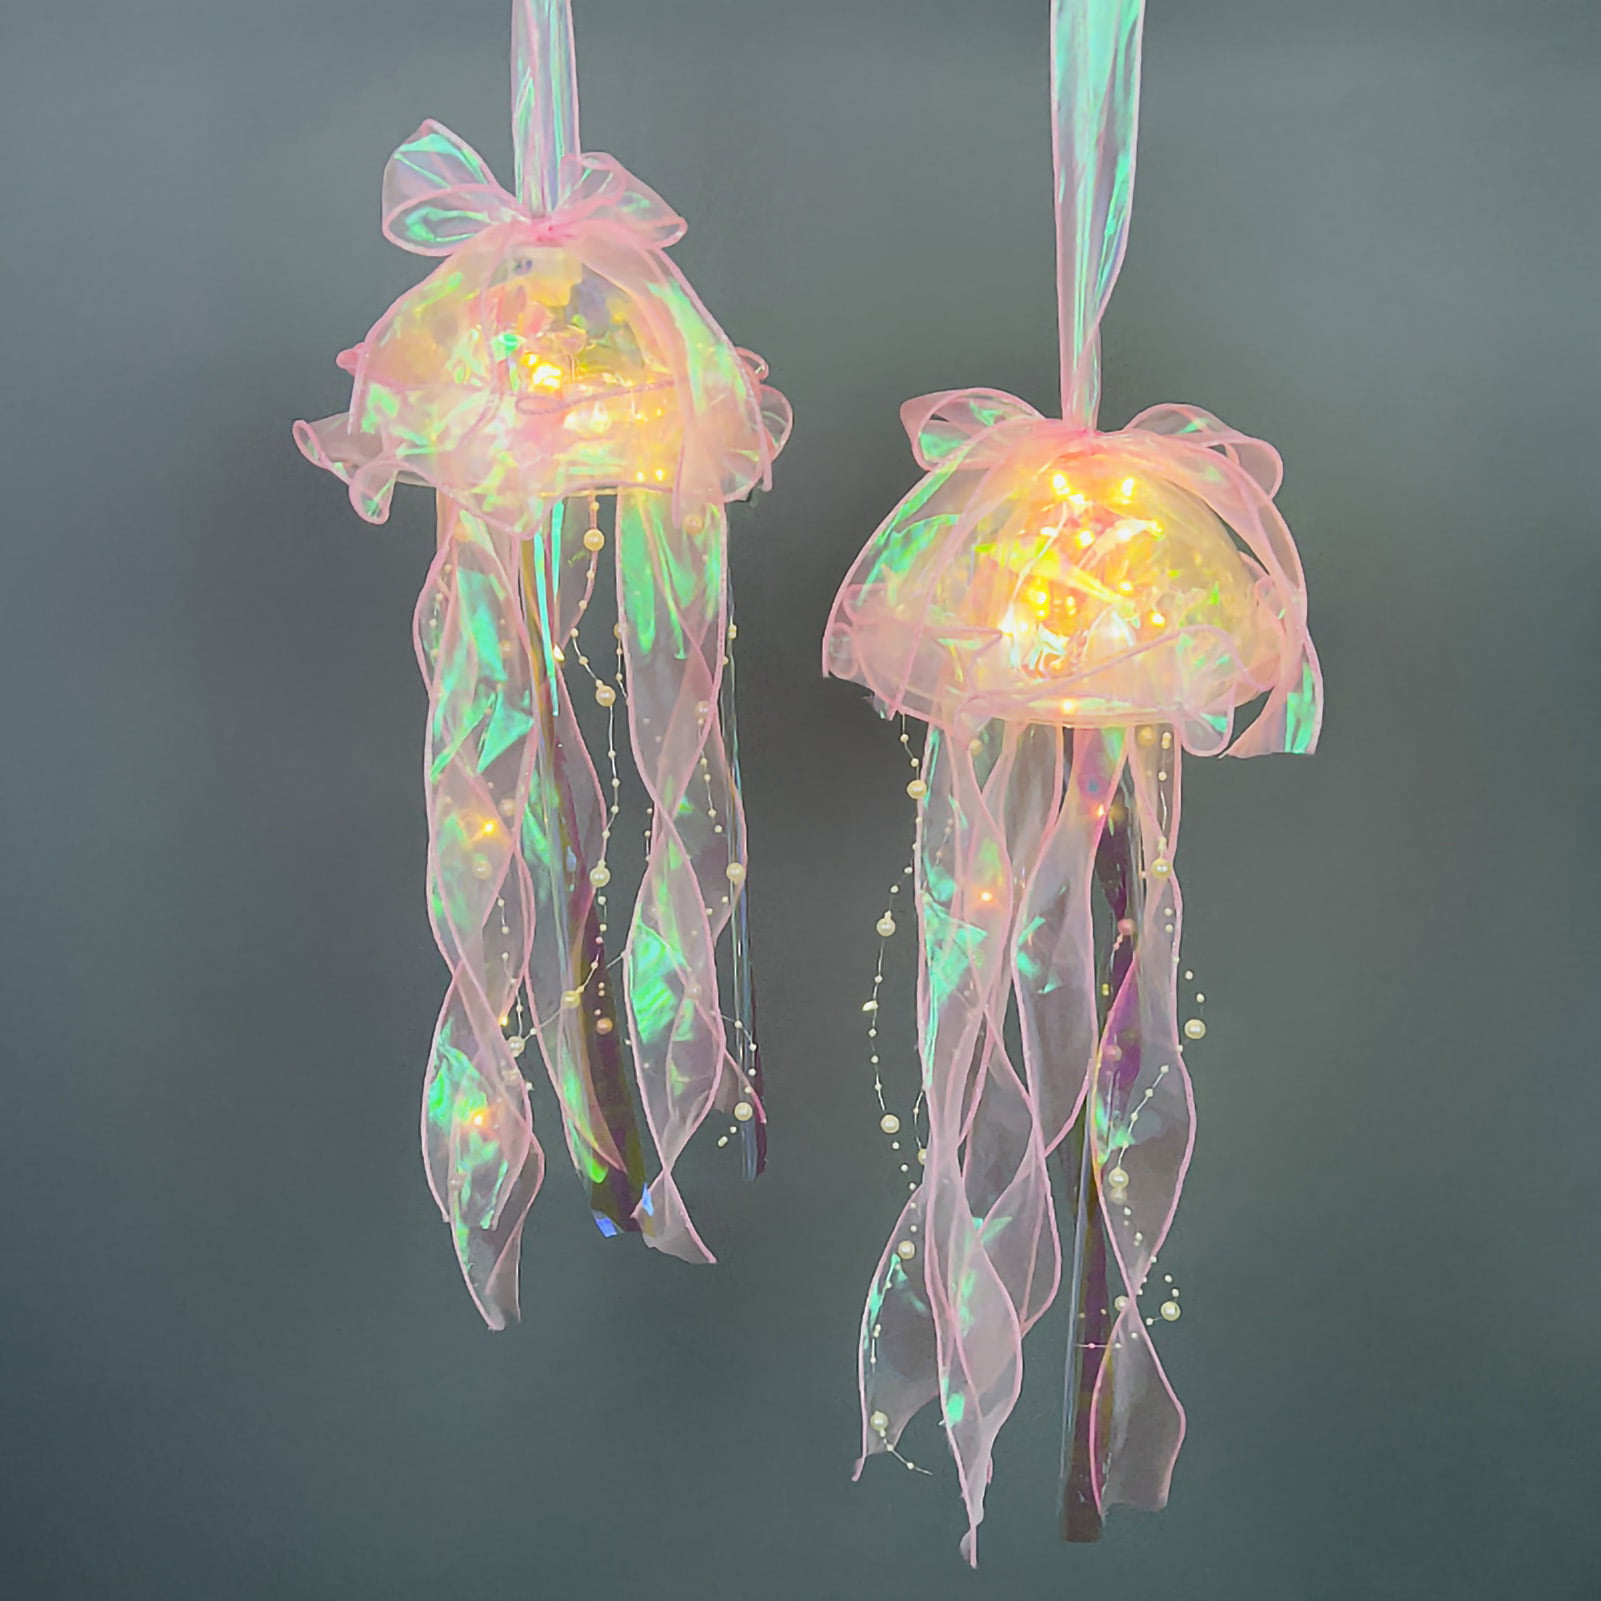 Sea glass and resin light sculpture - coloured sea glass - cast in resin -  lamp